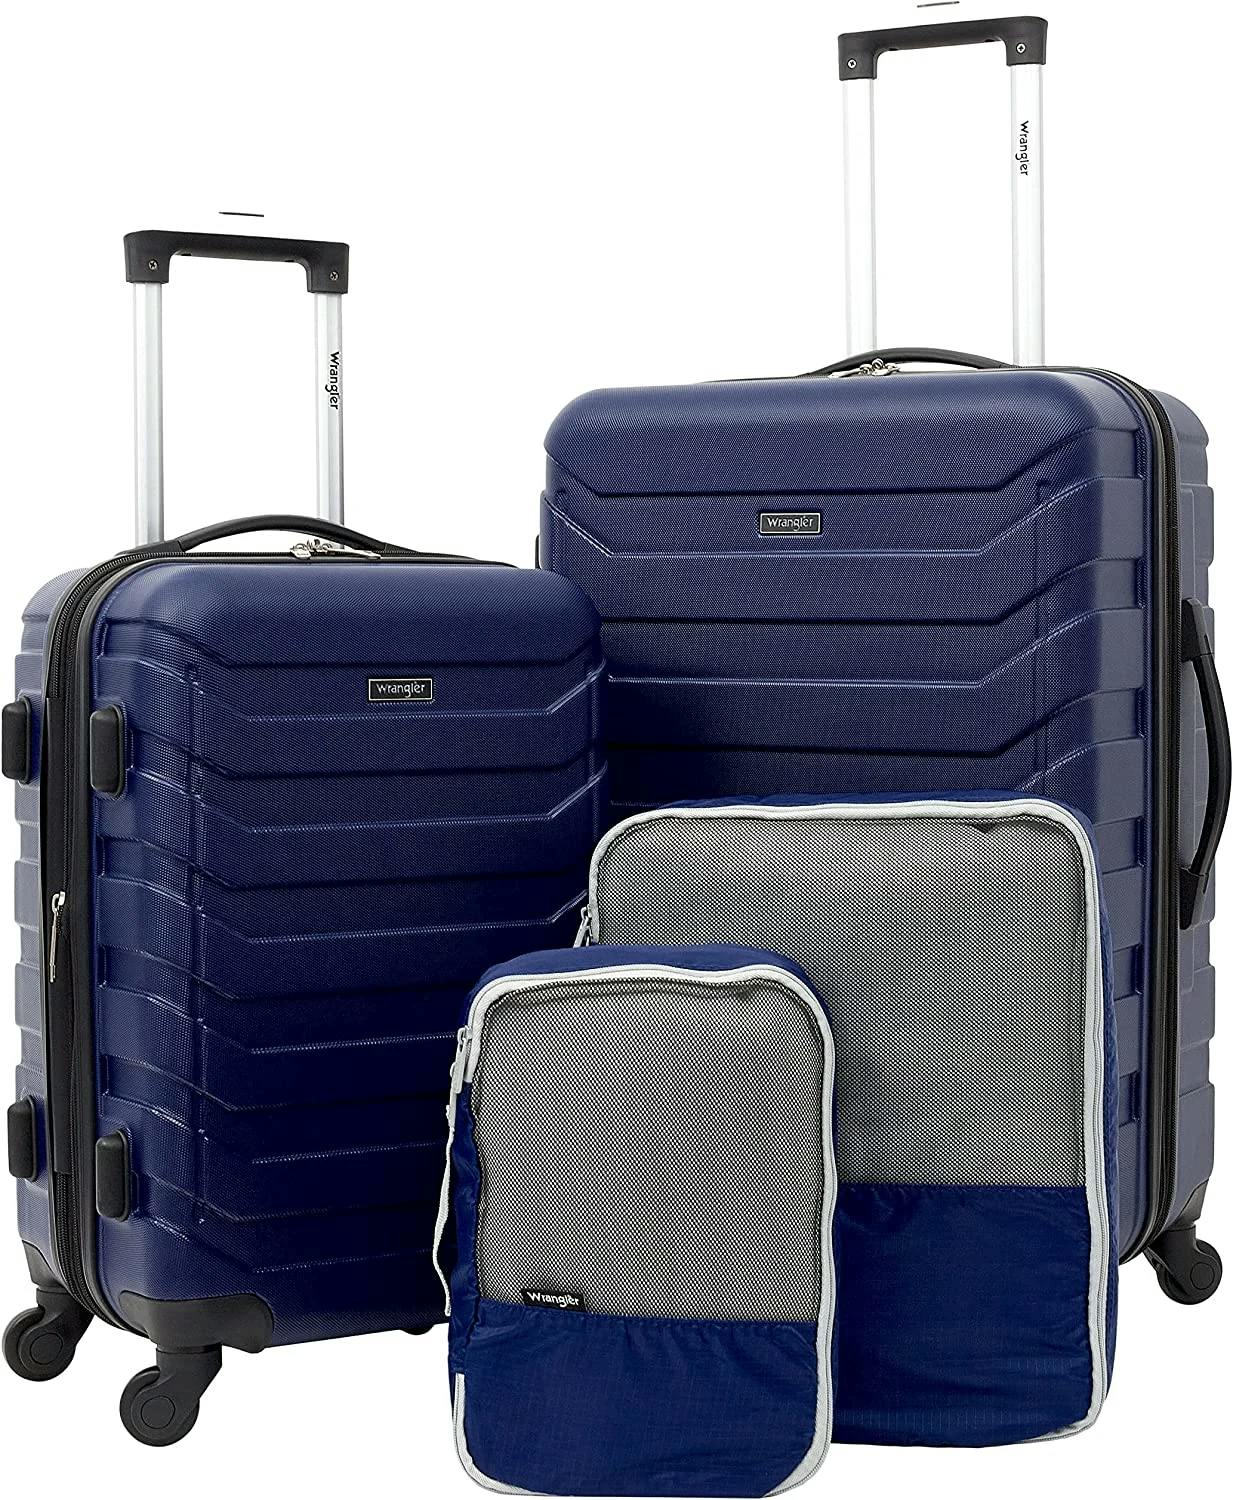 Wrangler 4 Piece Luggage and Packing Cubes Set